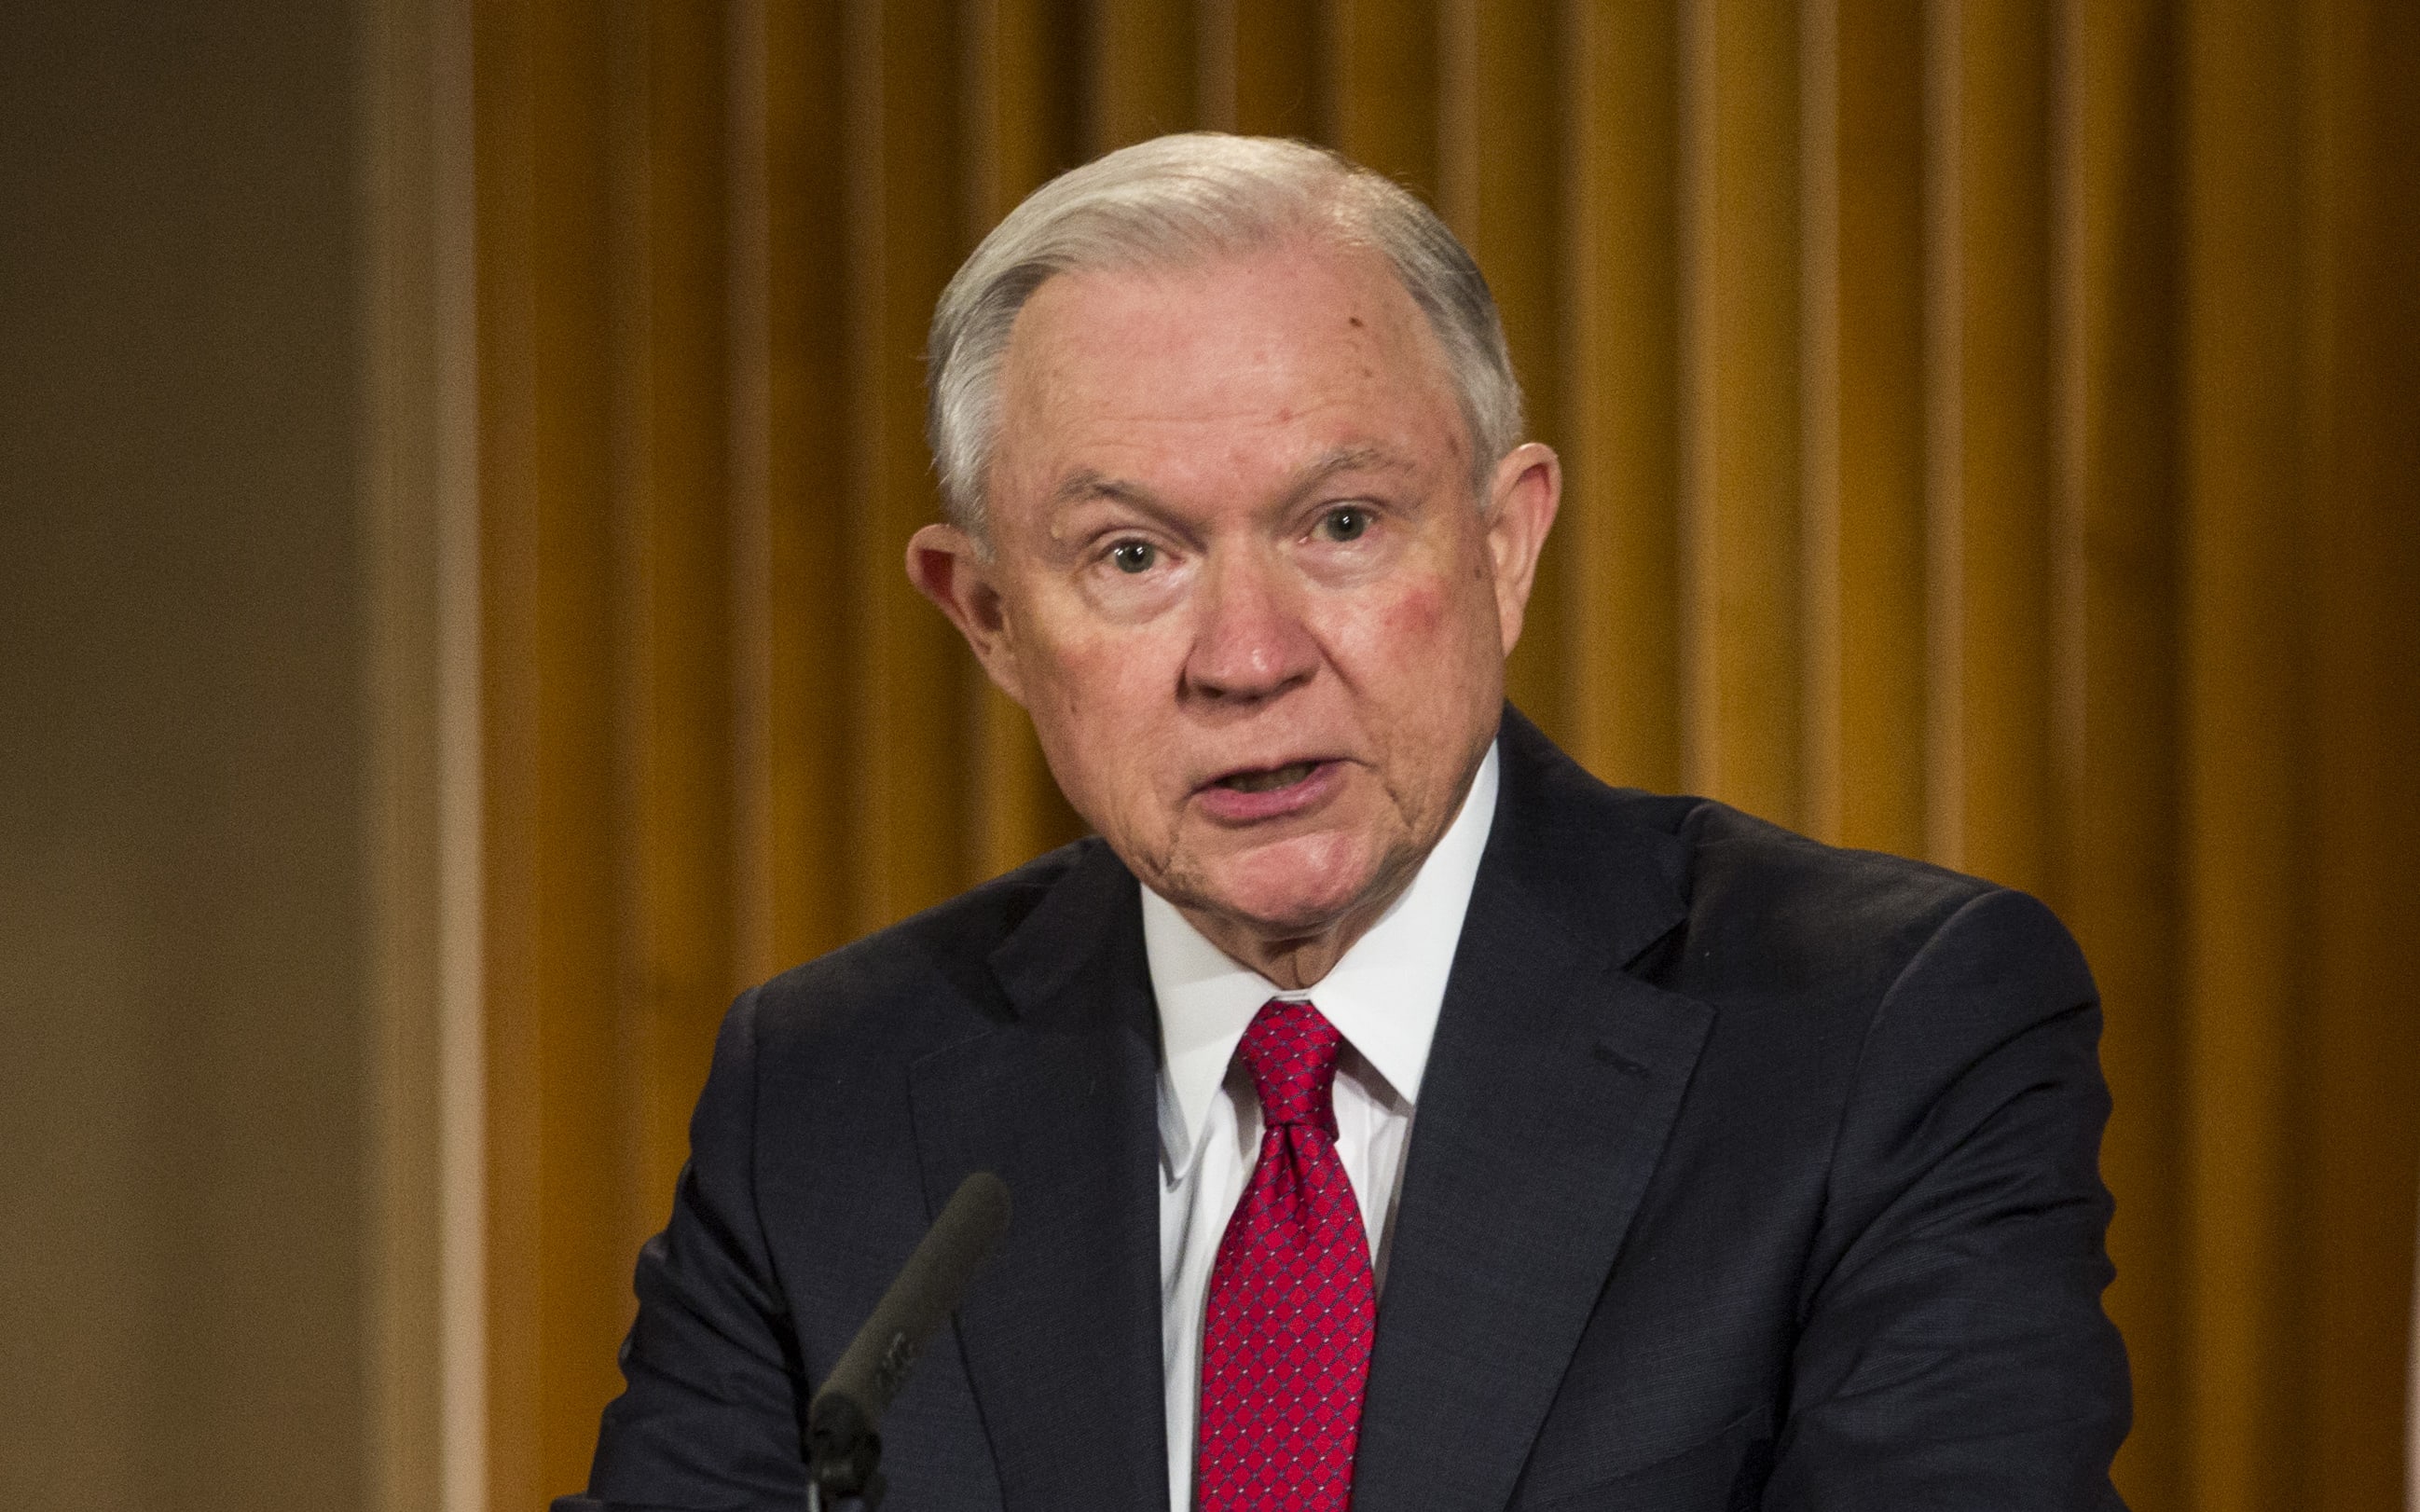 US Attorney General Jeff Sessions speaking at the Department of Justice, 28 February.